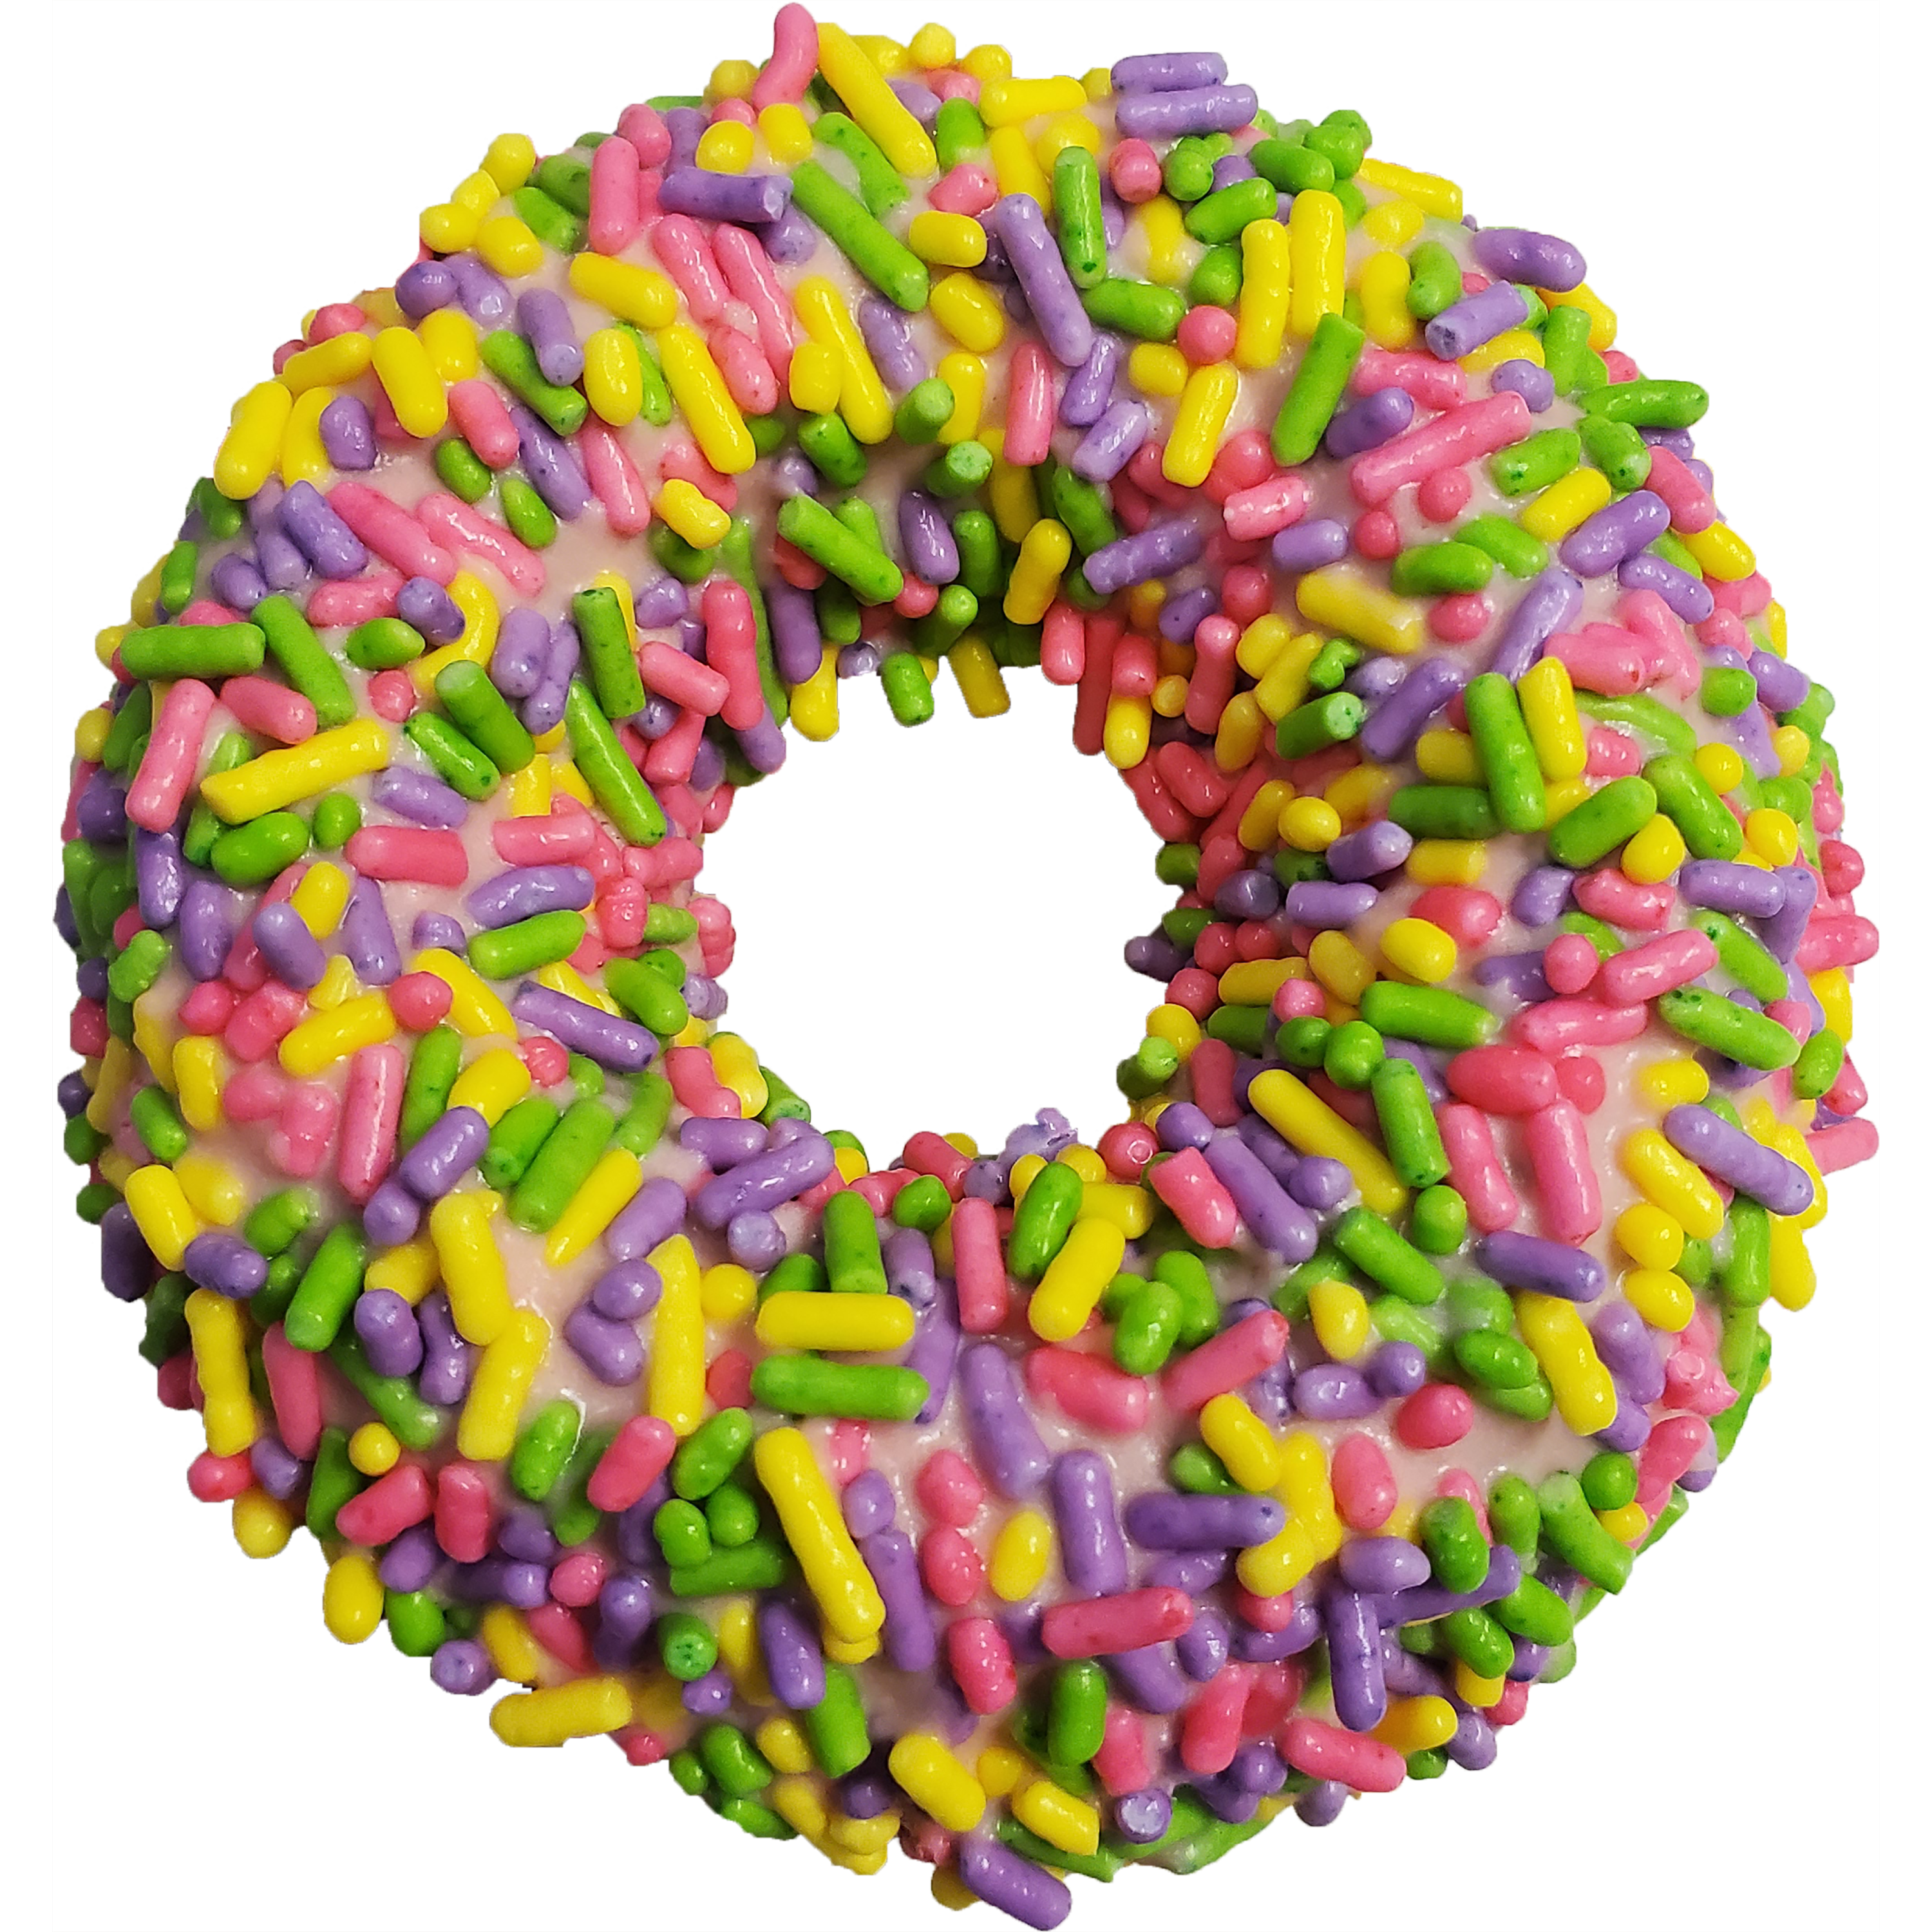 K9 Granola Factory Donut Shop Gourmet Donut For Dogs, Pink with Jimmies